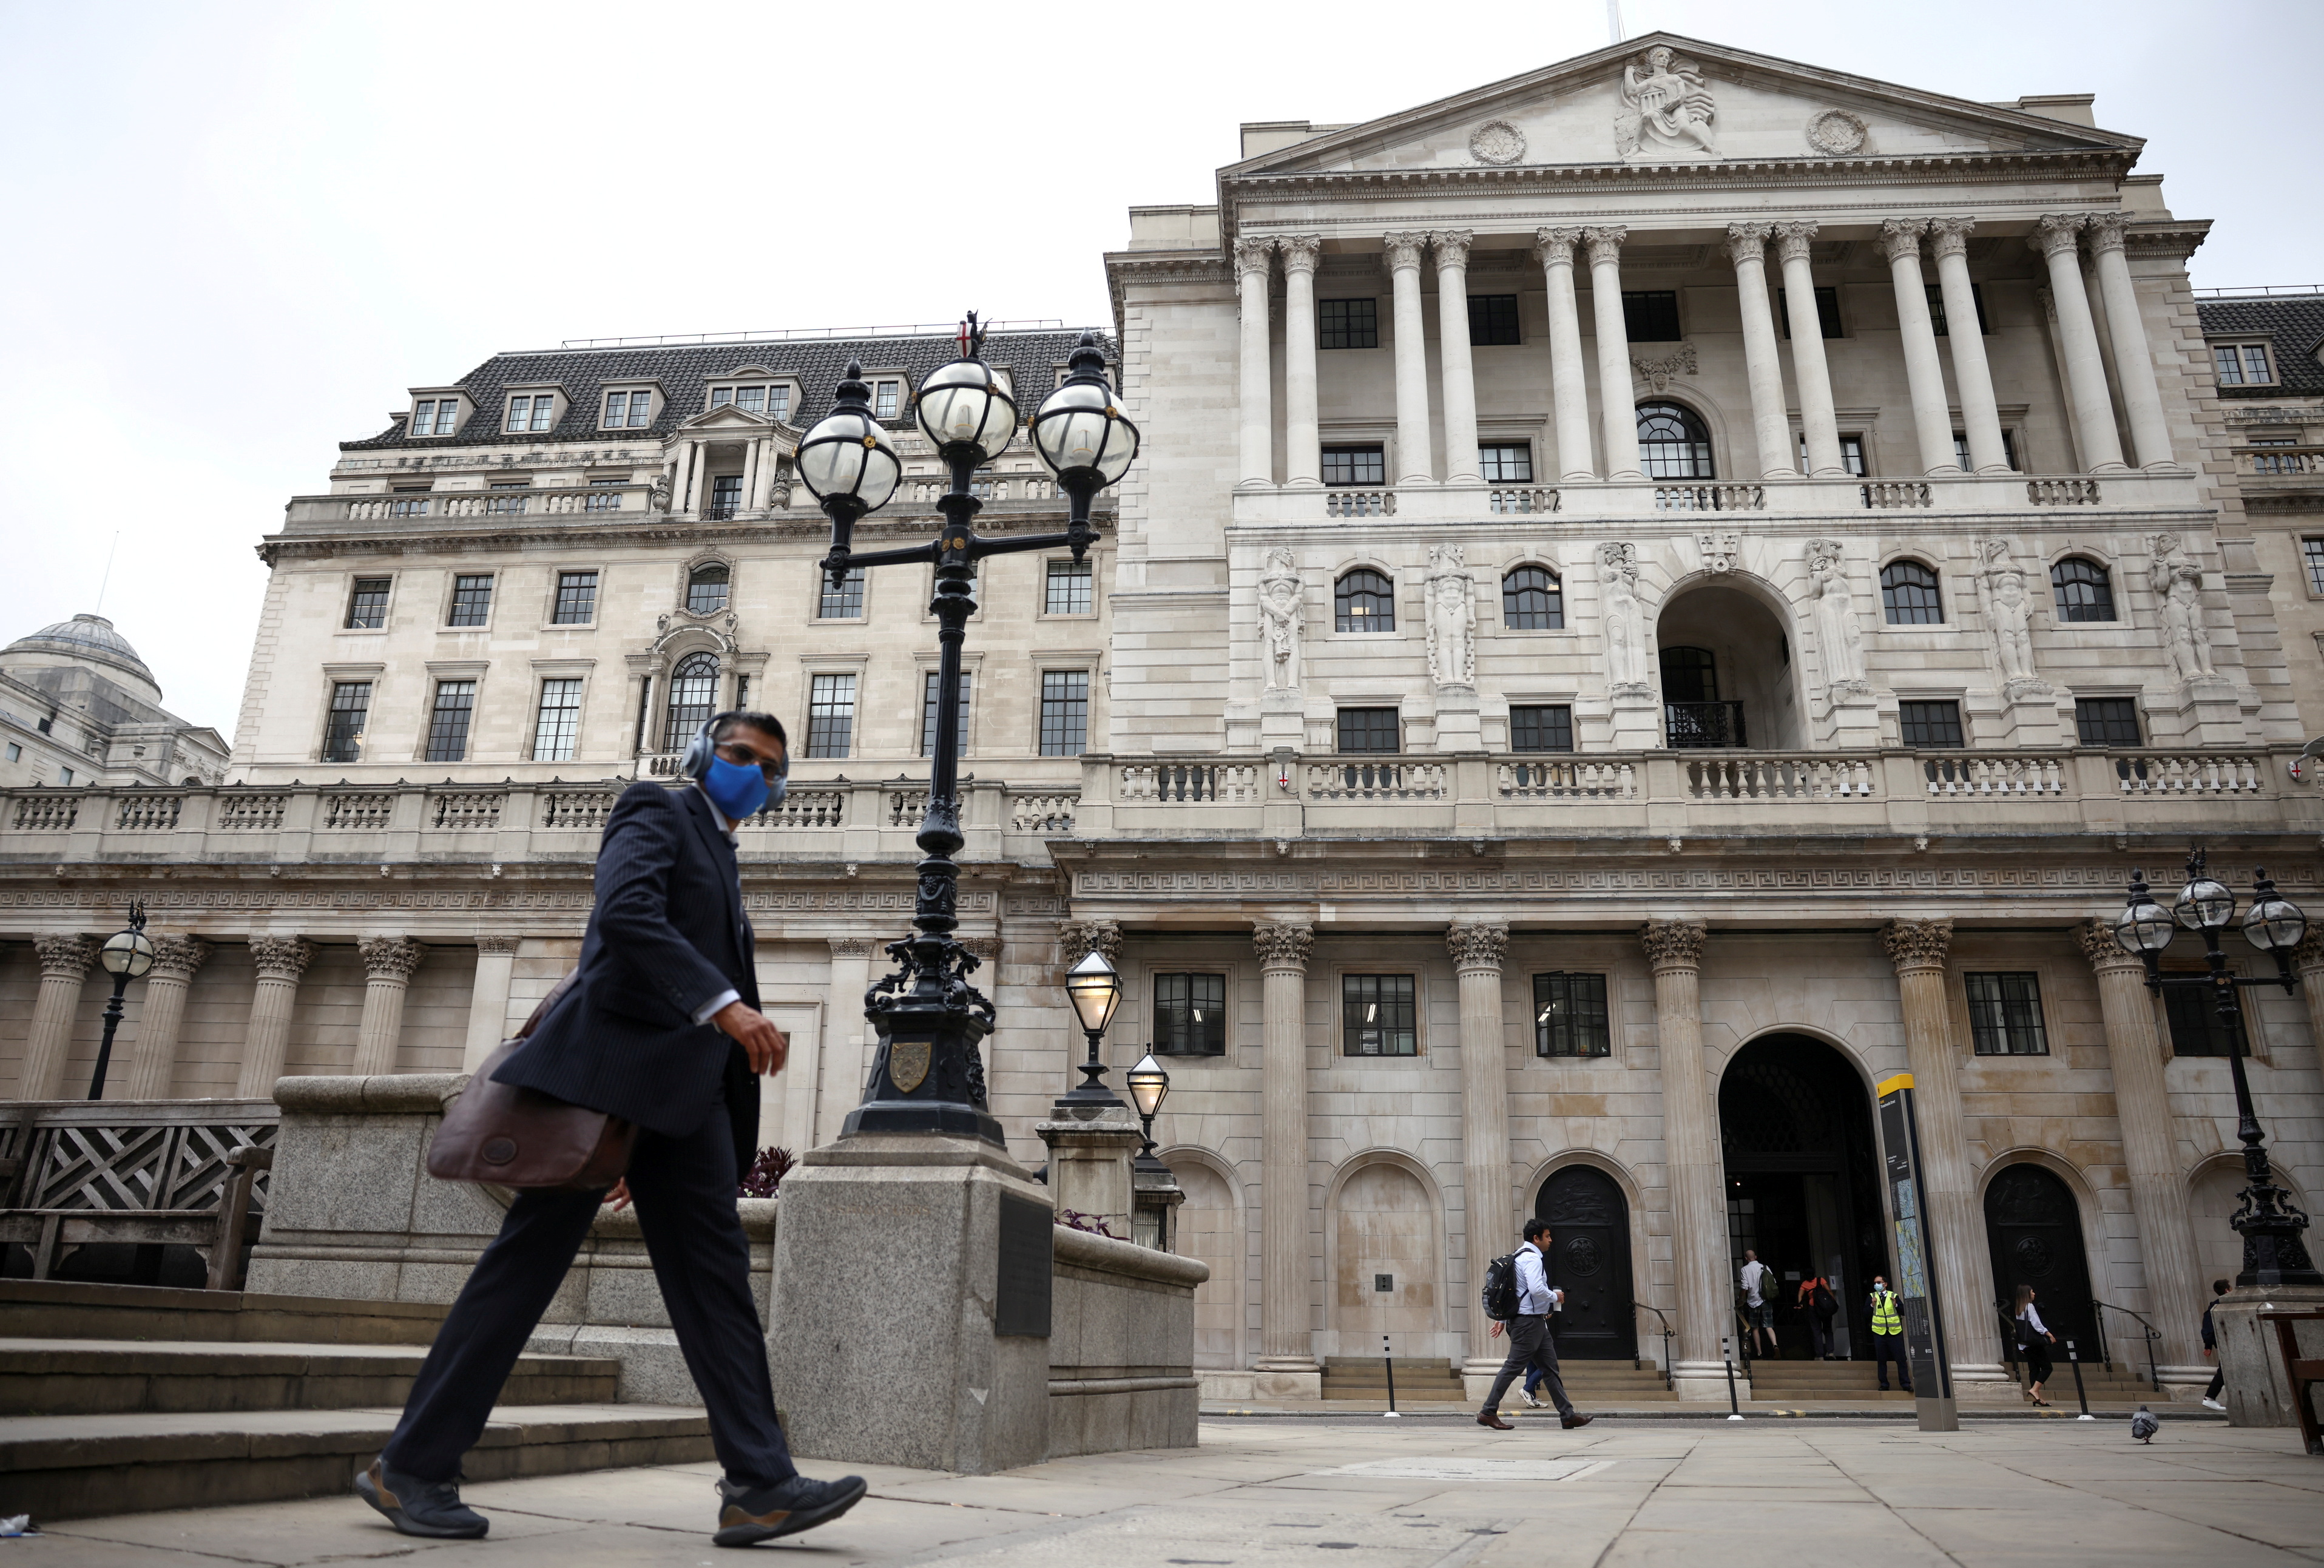 A person walks past the Bank of England in the City of London financial district